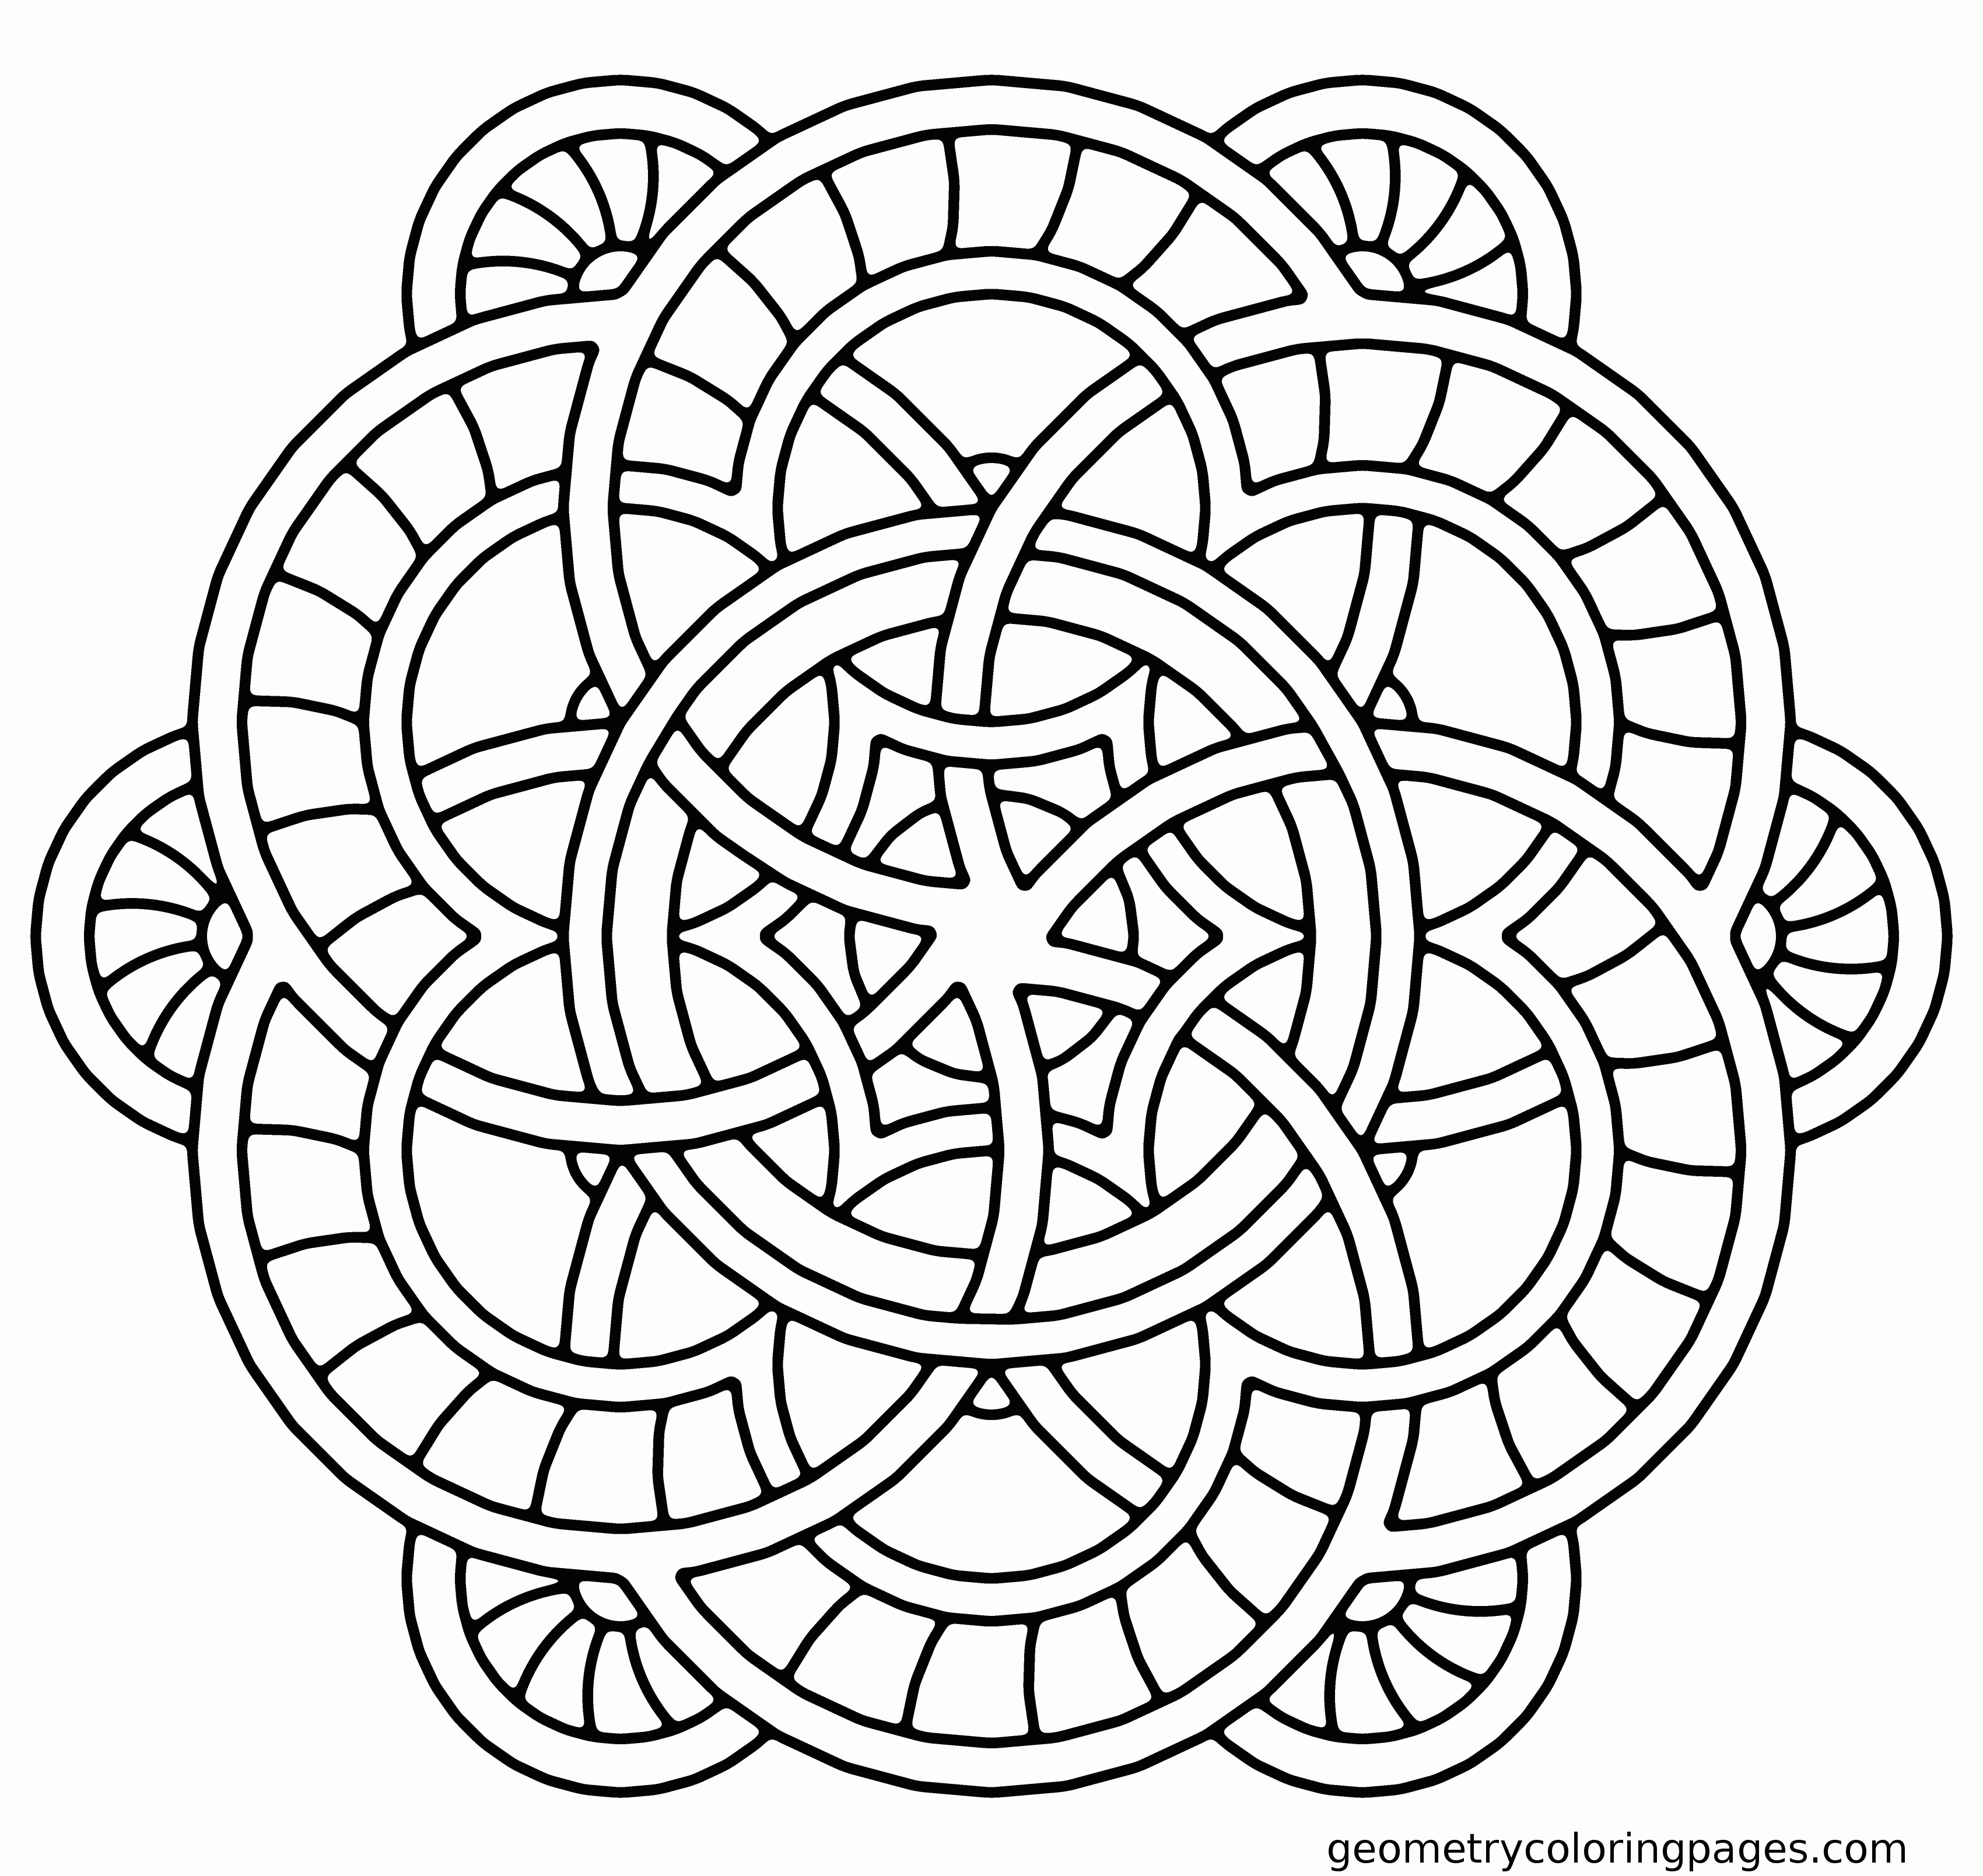 Free Online Abstract Coloring Pages   Coloring Home